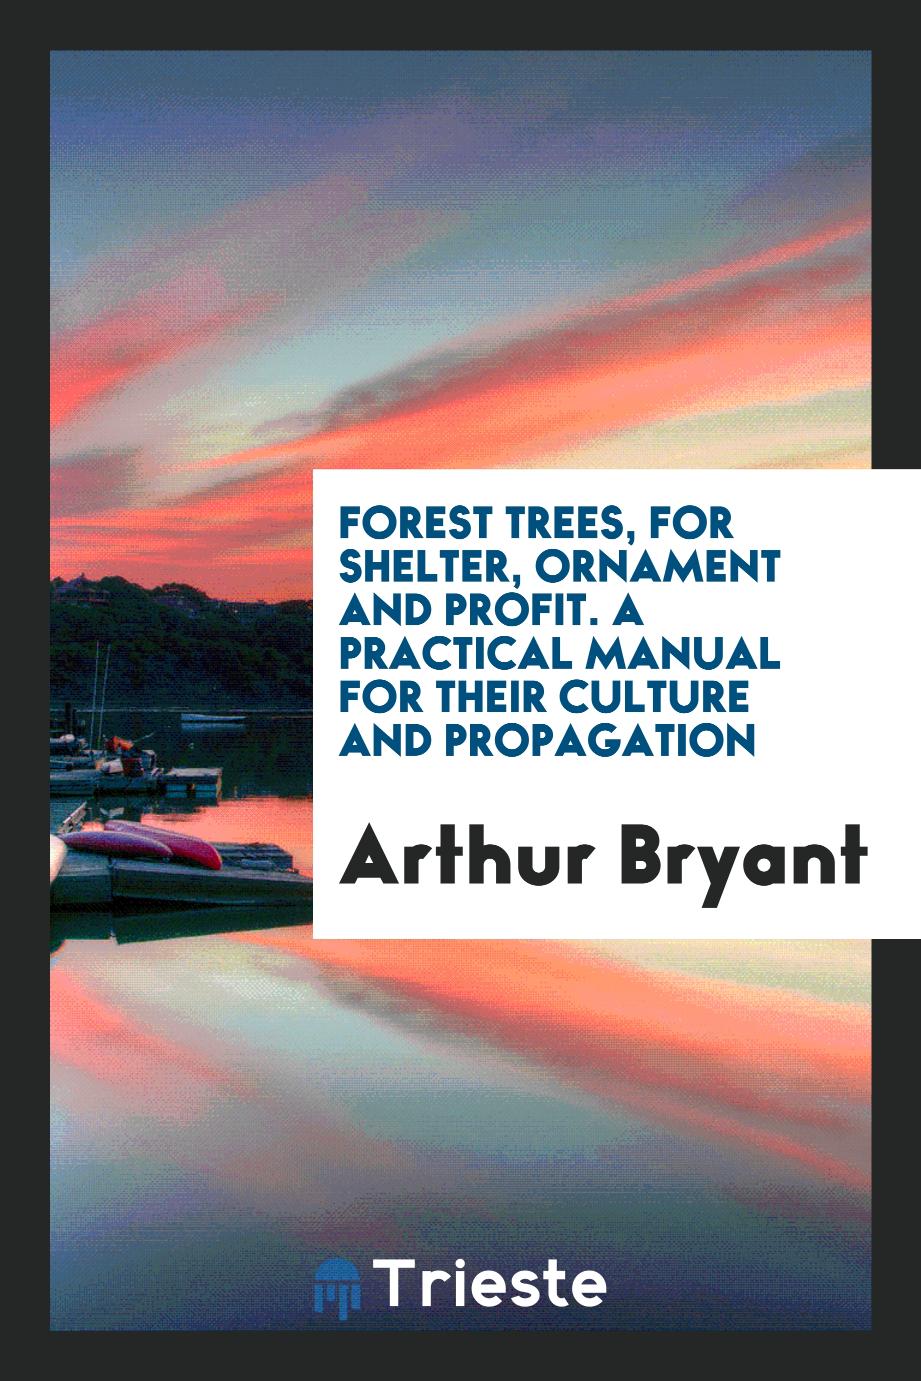 Forest Trees, for Shelter, Ornament and Profit. A Practical Manual for Their Culture and Propagation